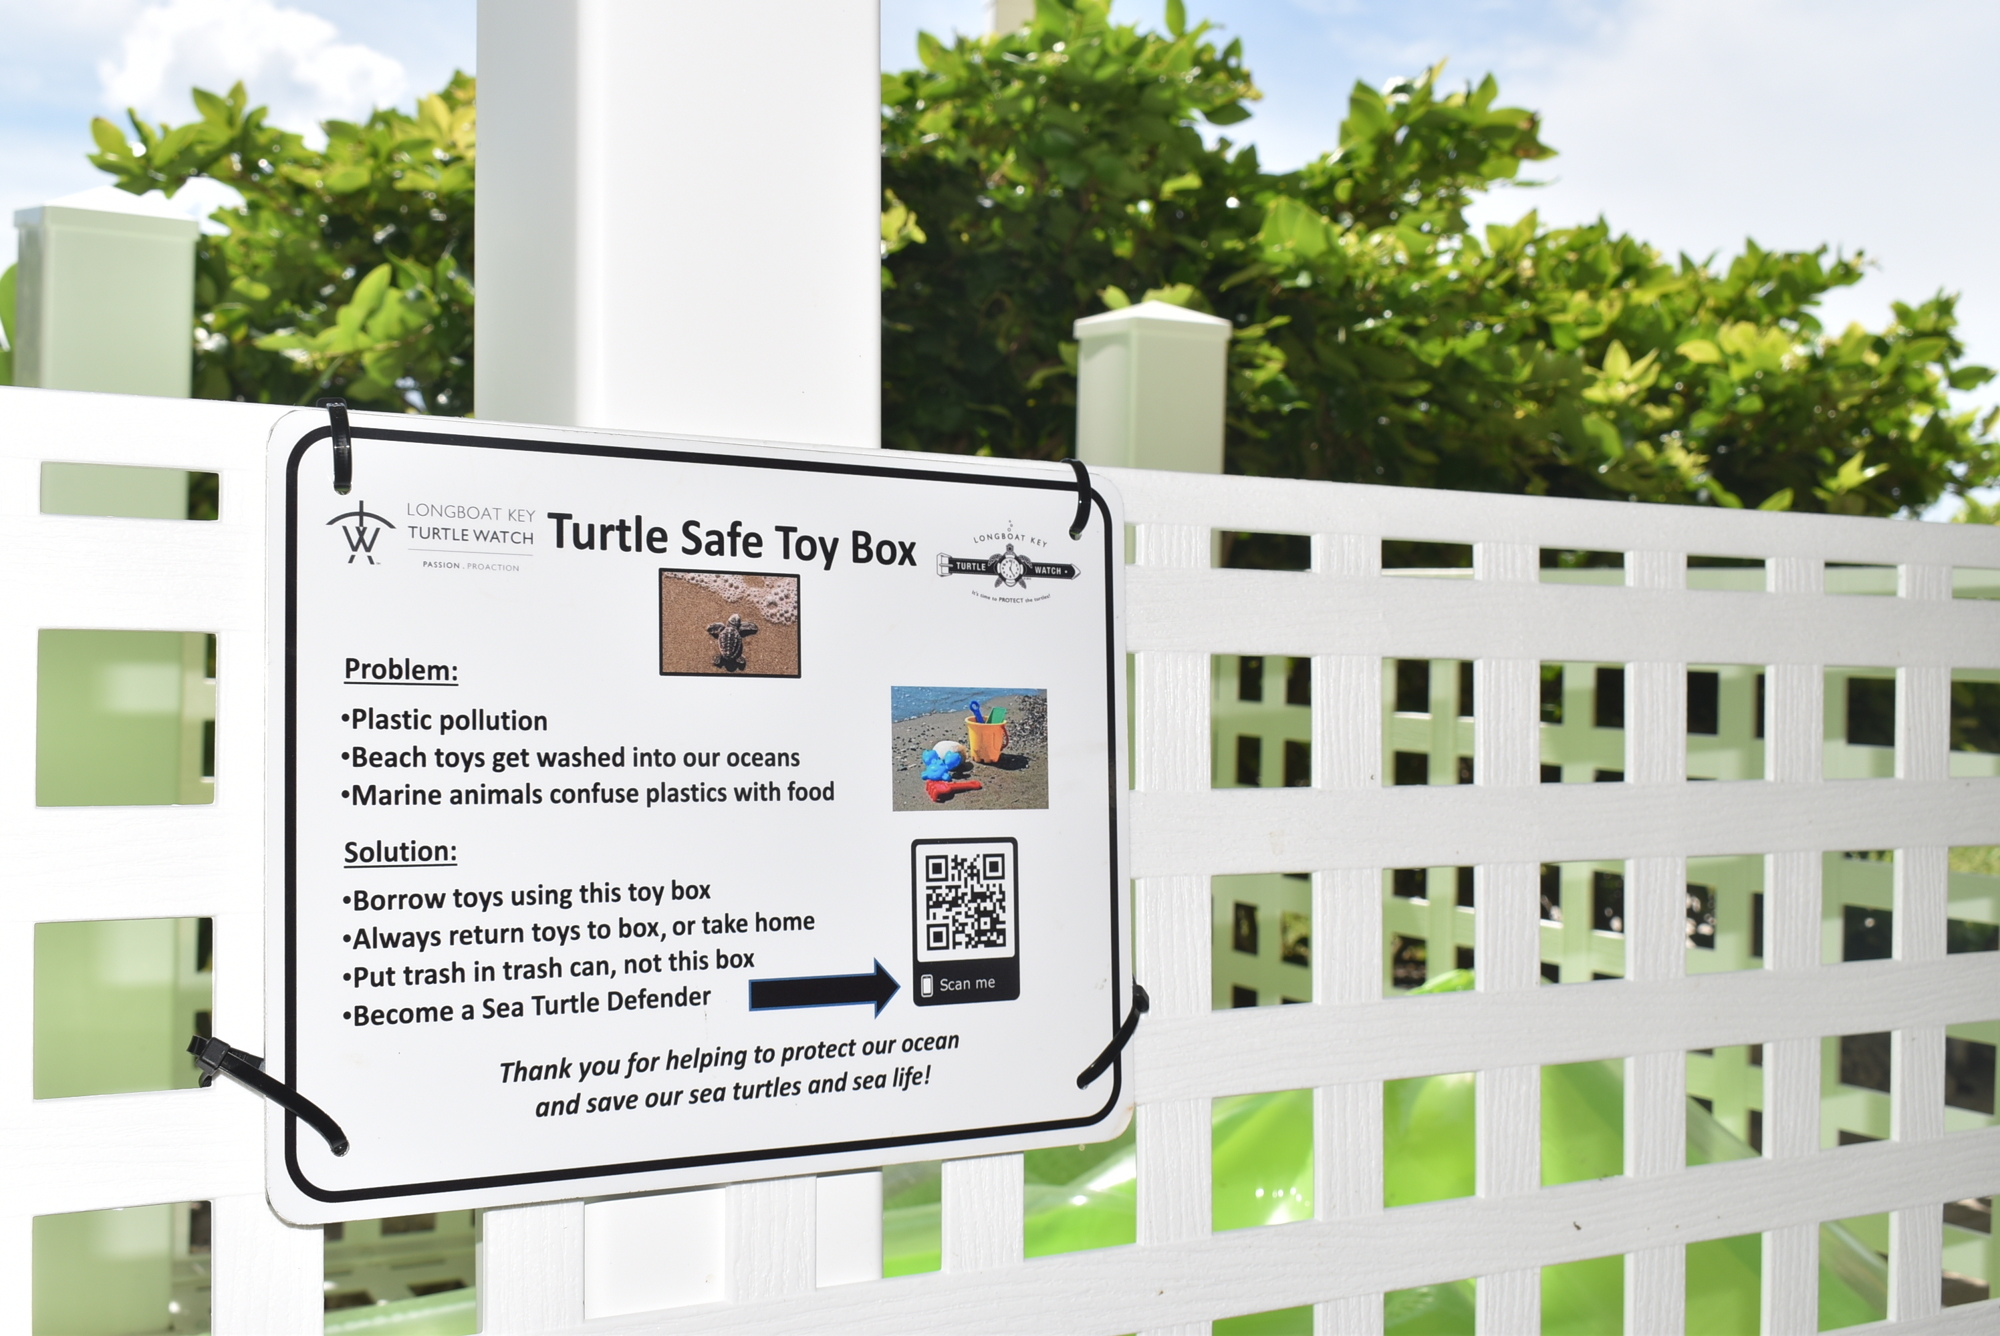 The box is affixed with a plaque with information about sea turtle safety.